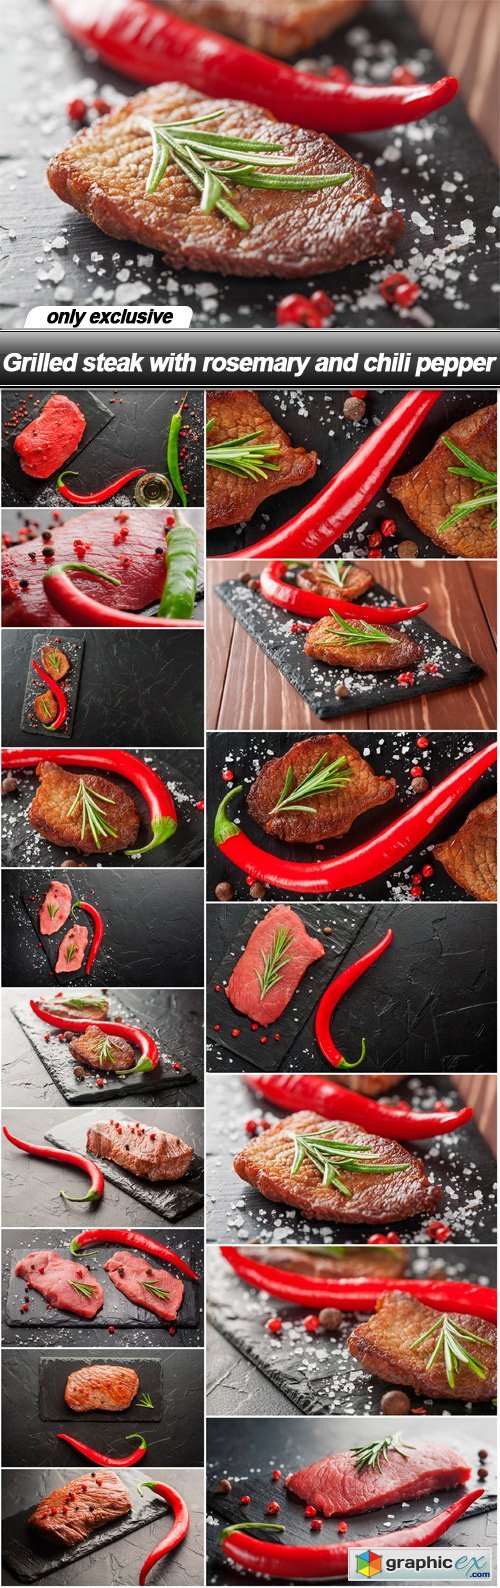 Grilled steak with rosemary and chili pepper - 17 UHQ JPEG